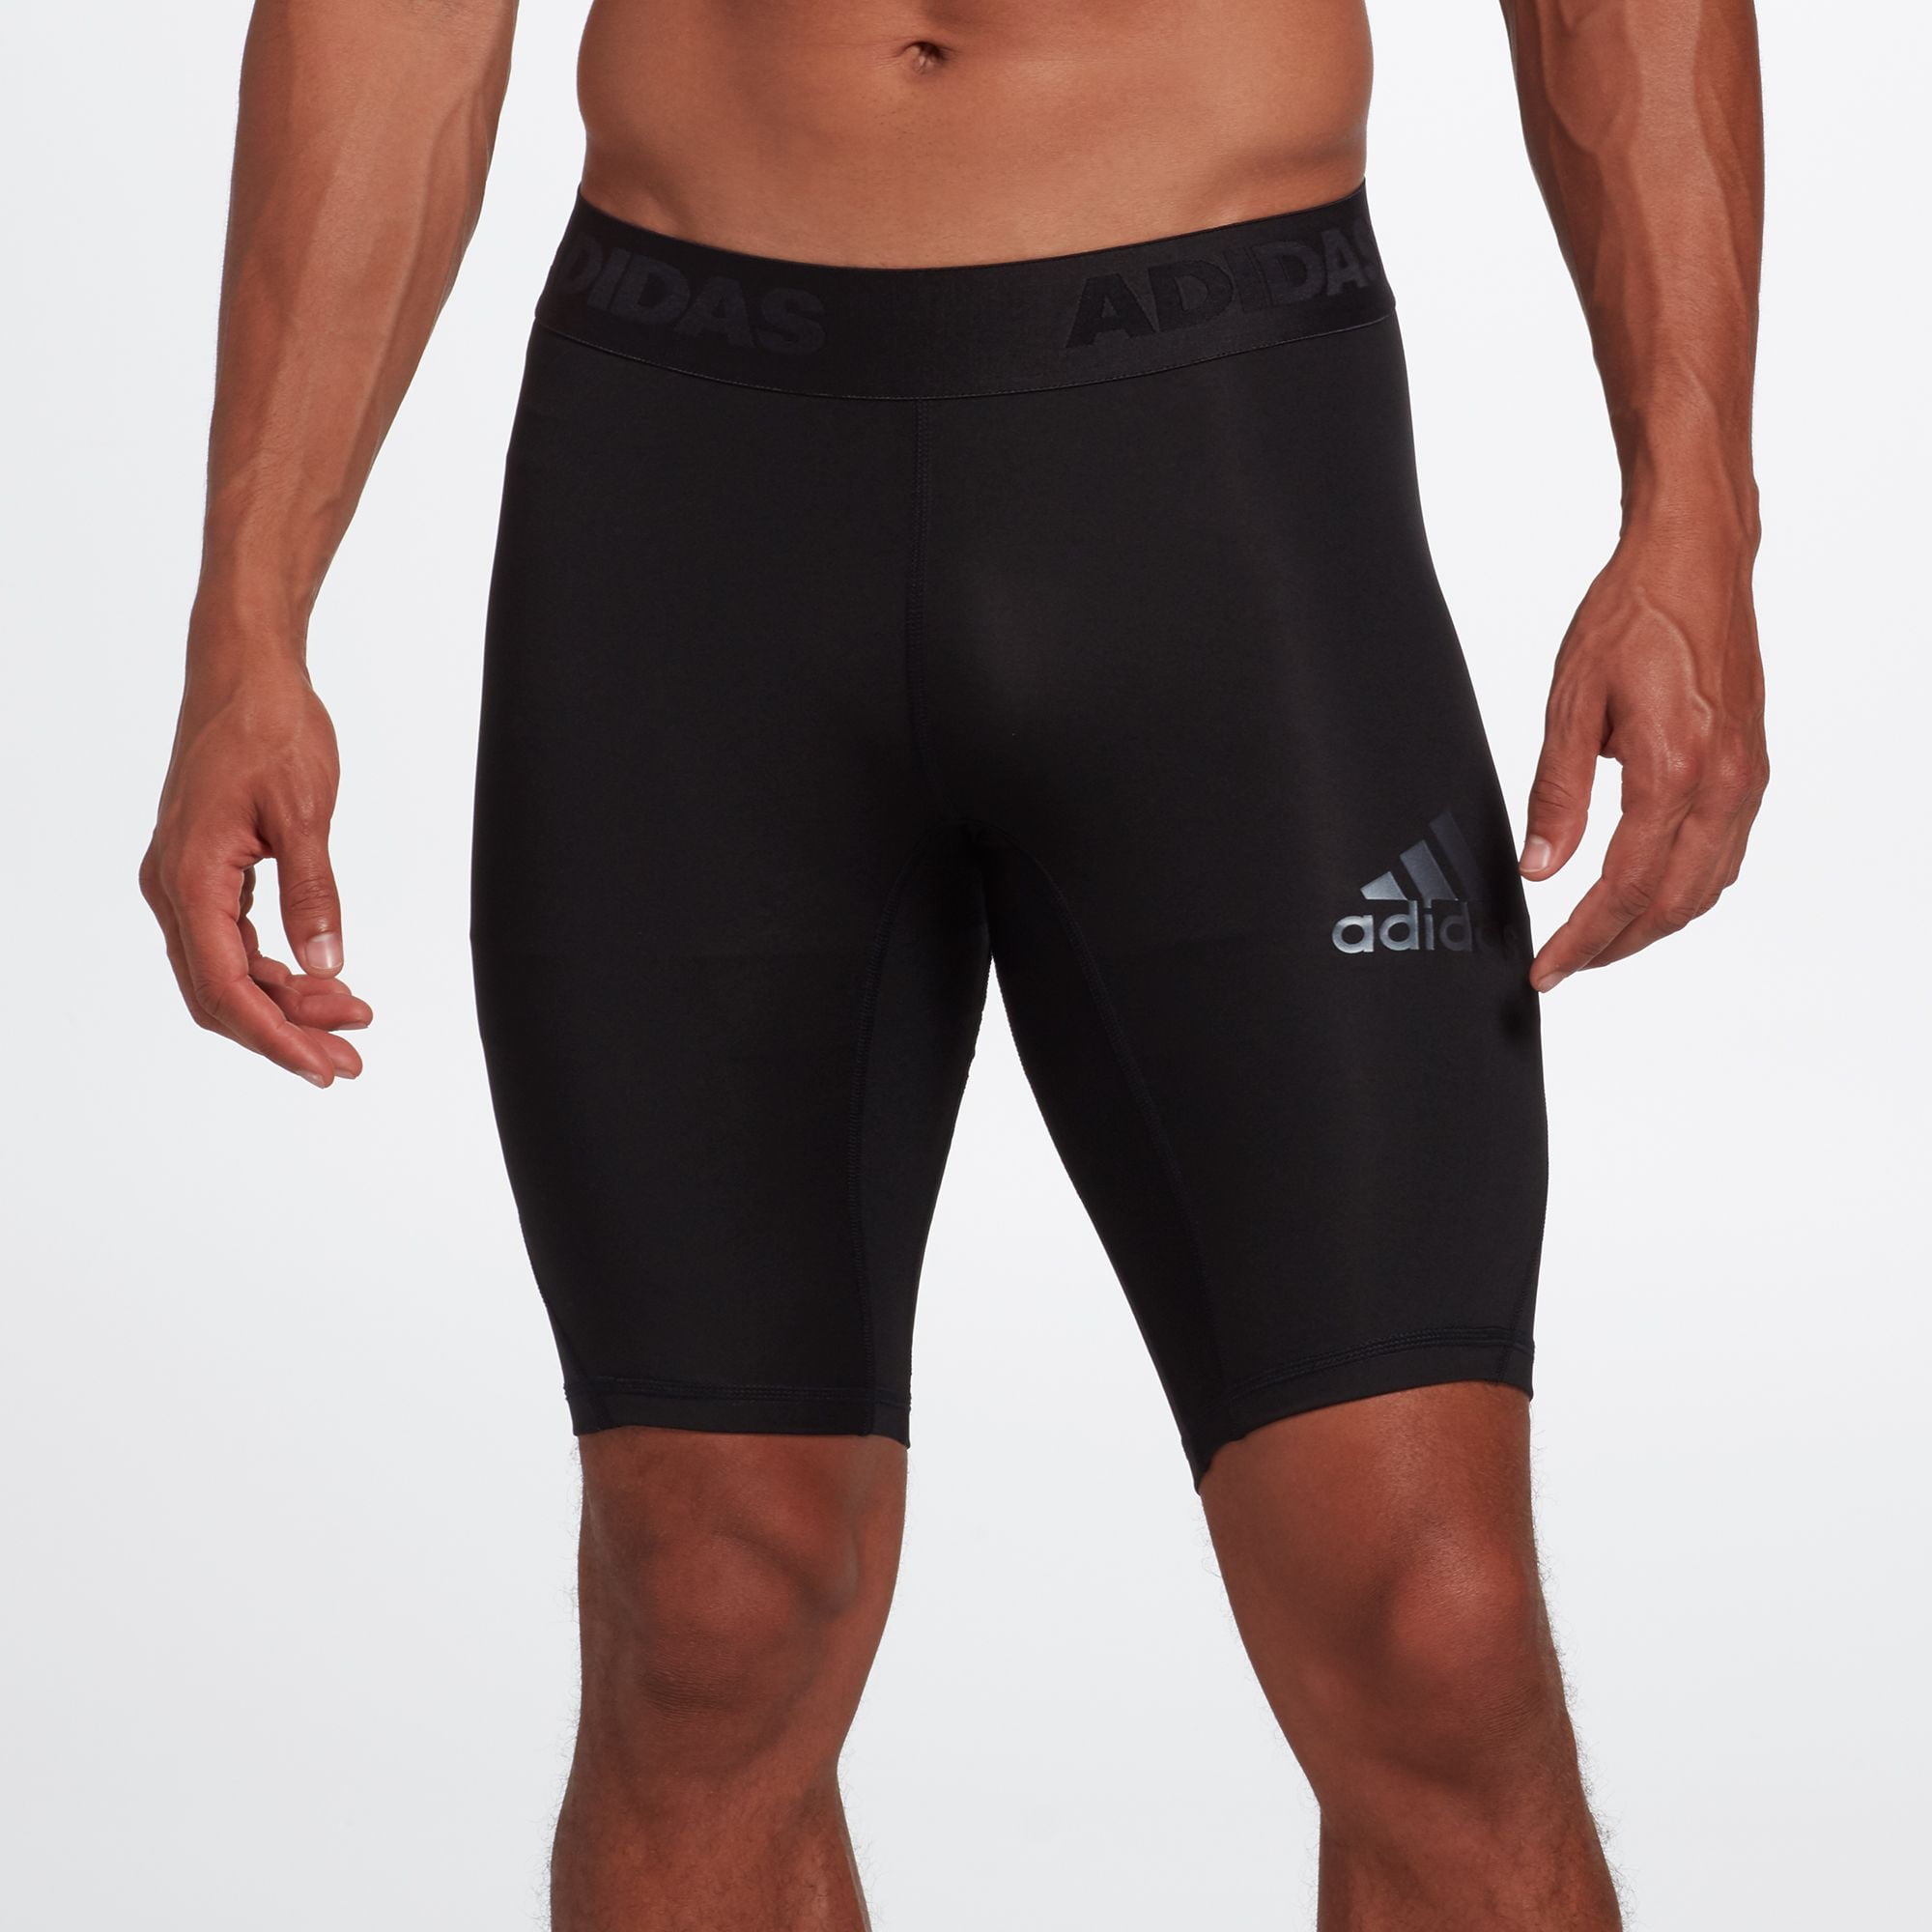 14 Best Adidas Compression Shorts For 2023